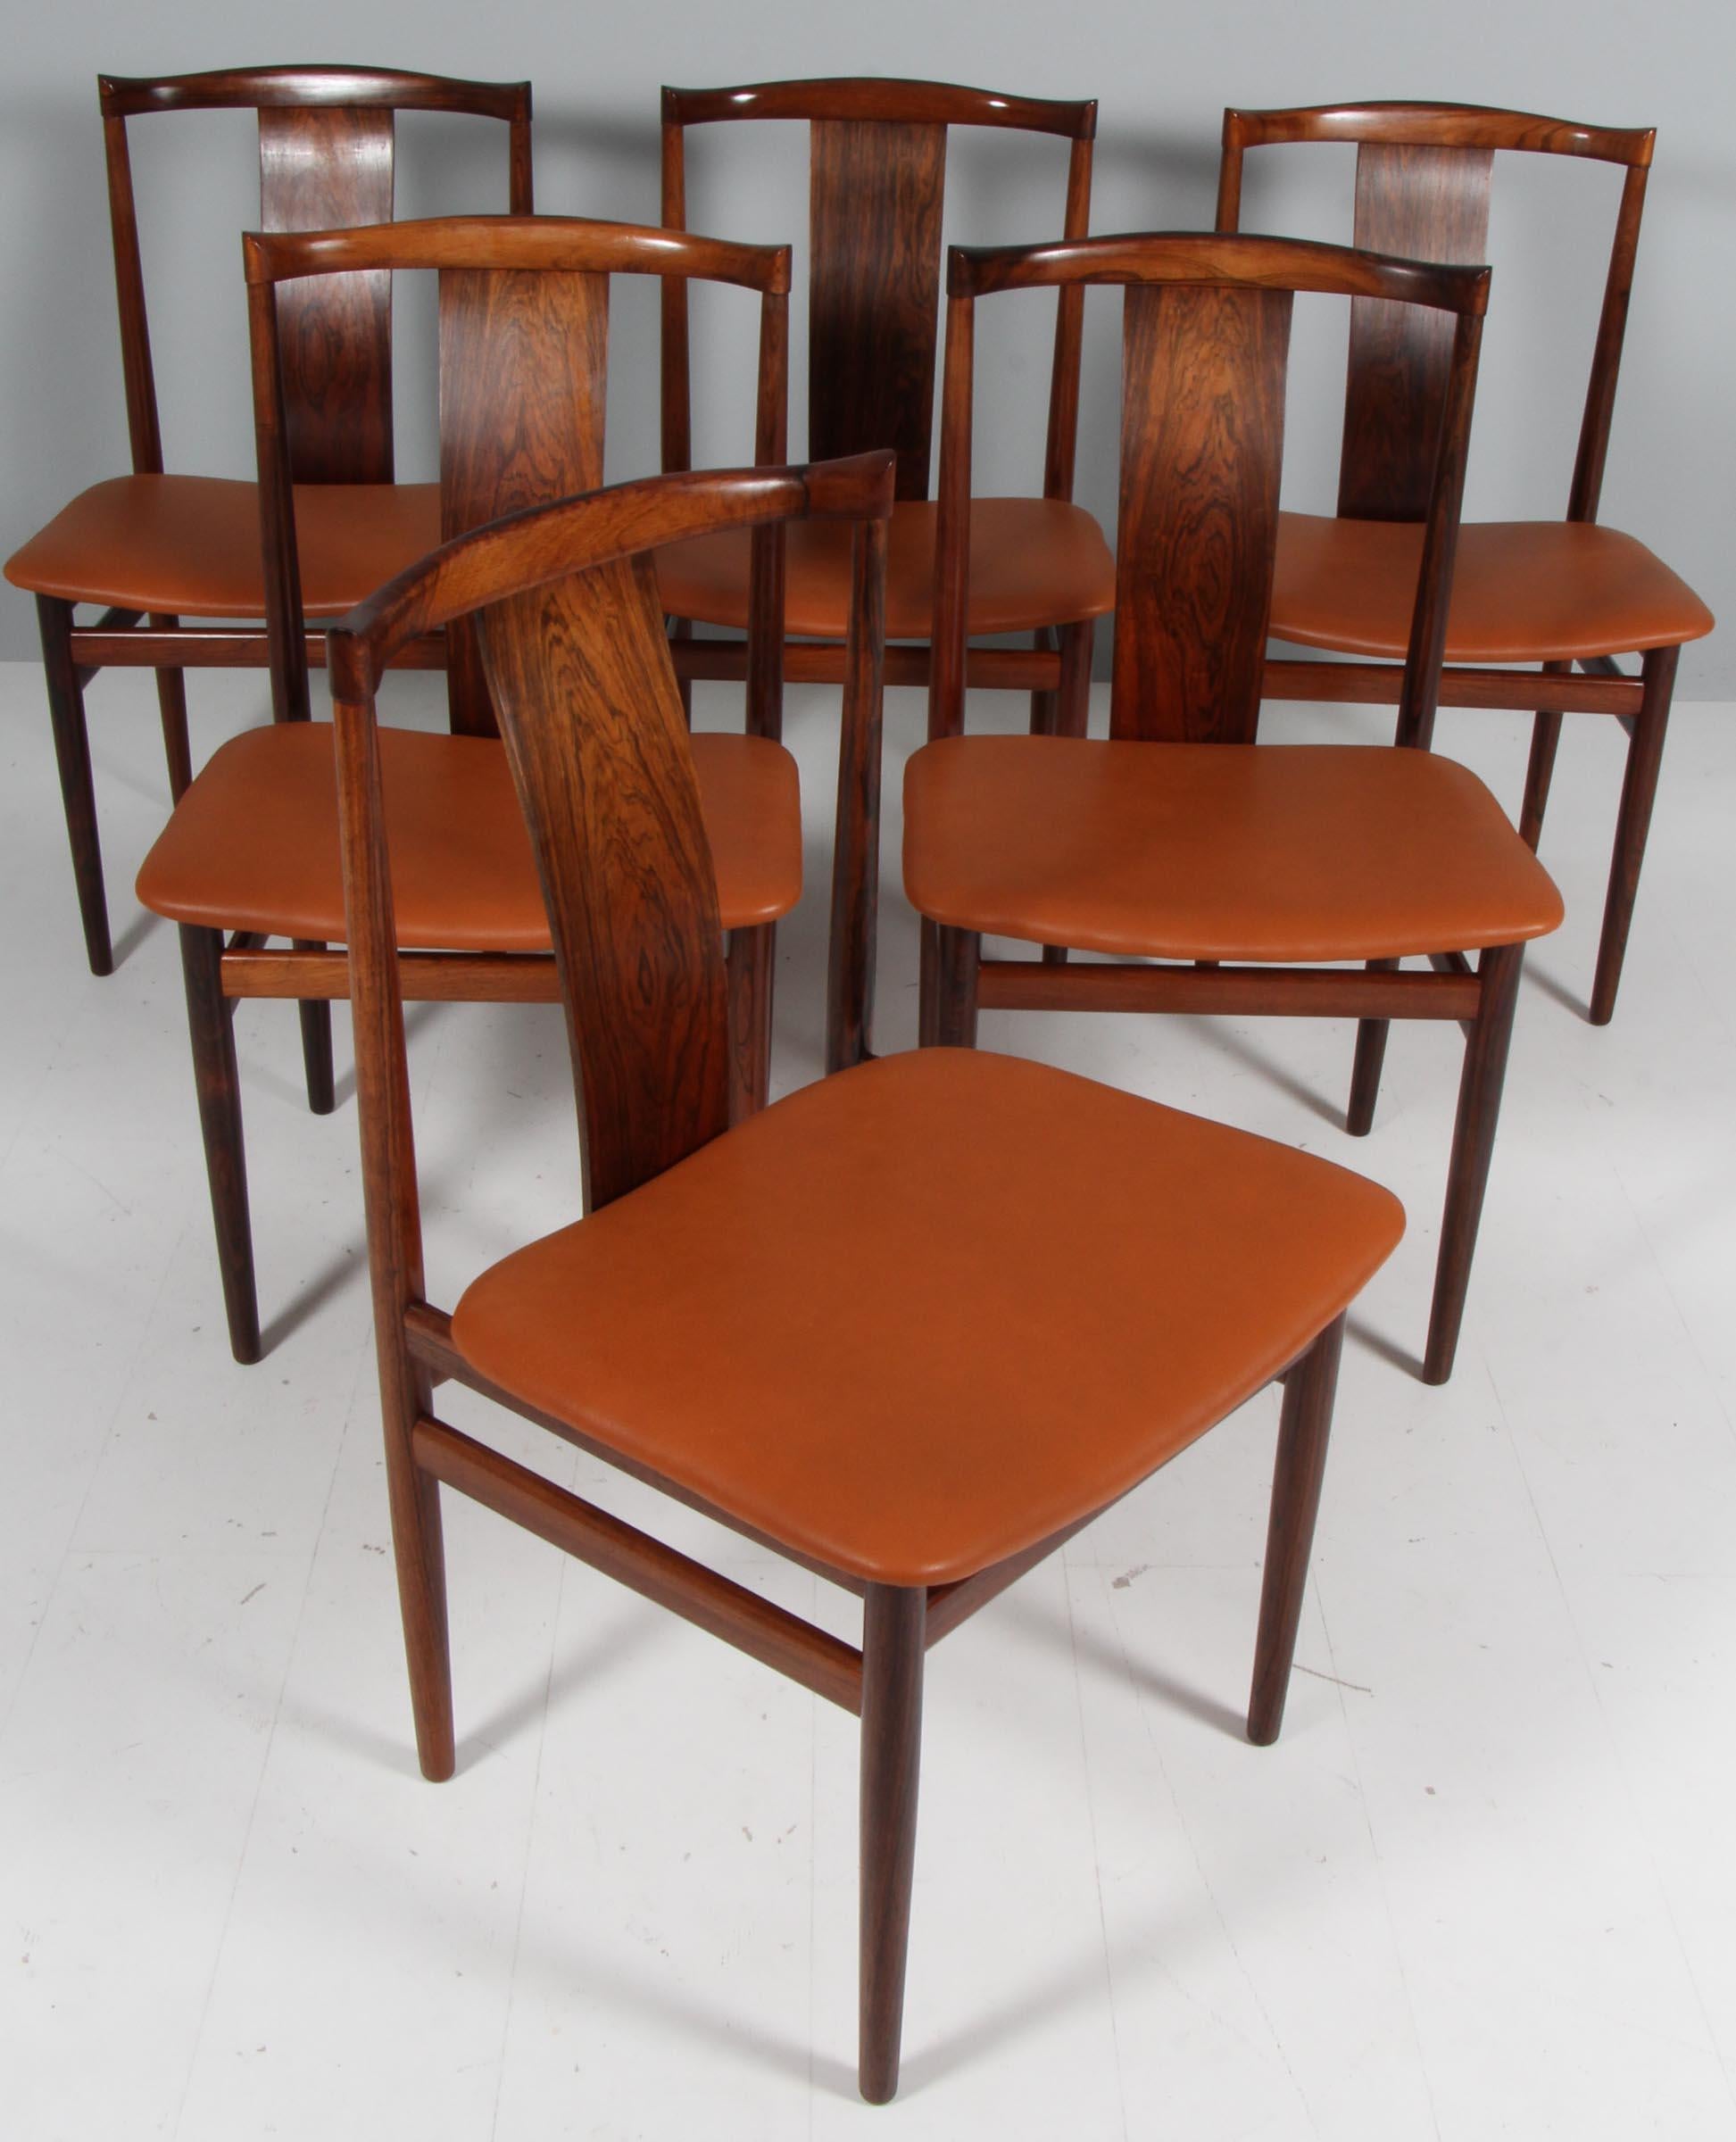 Henning Sørensen set of six high back dining chairs in partly solid rosewood.

New upholstered with tan full grain aniline leather.

Made by Dan-EX in the 1960s.